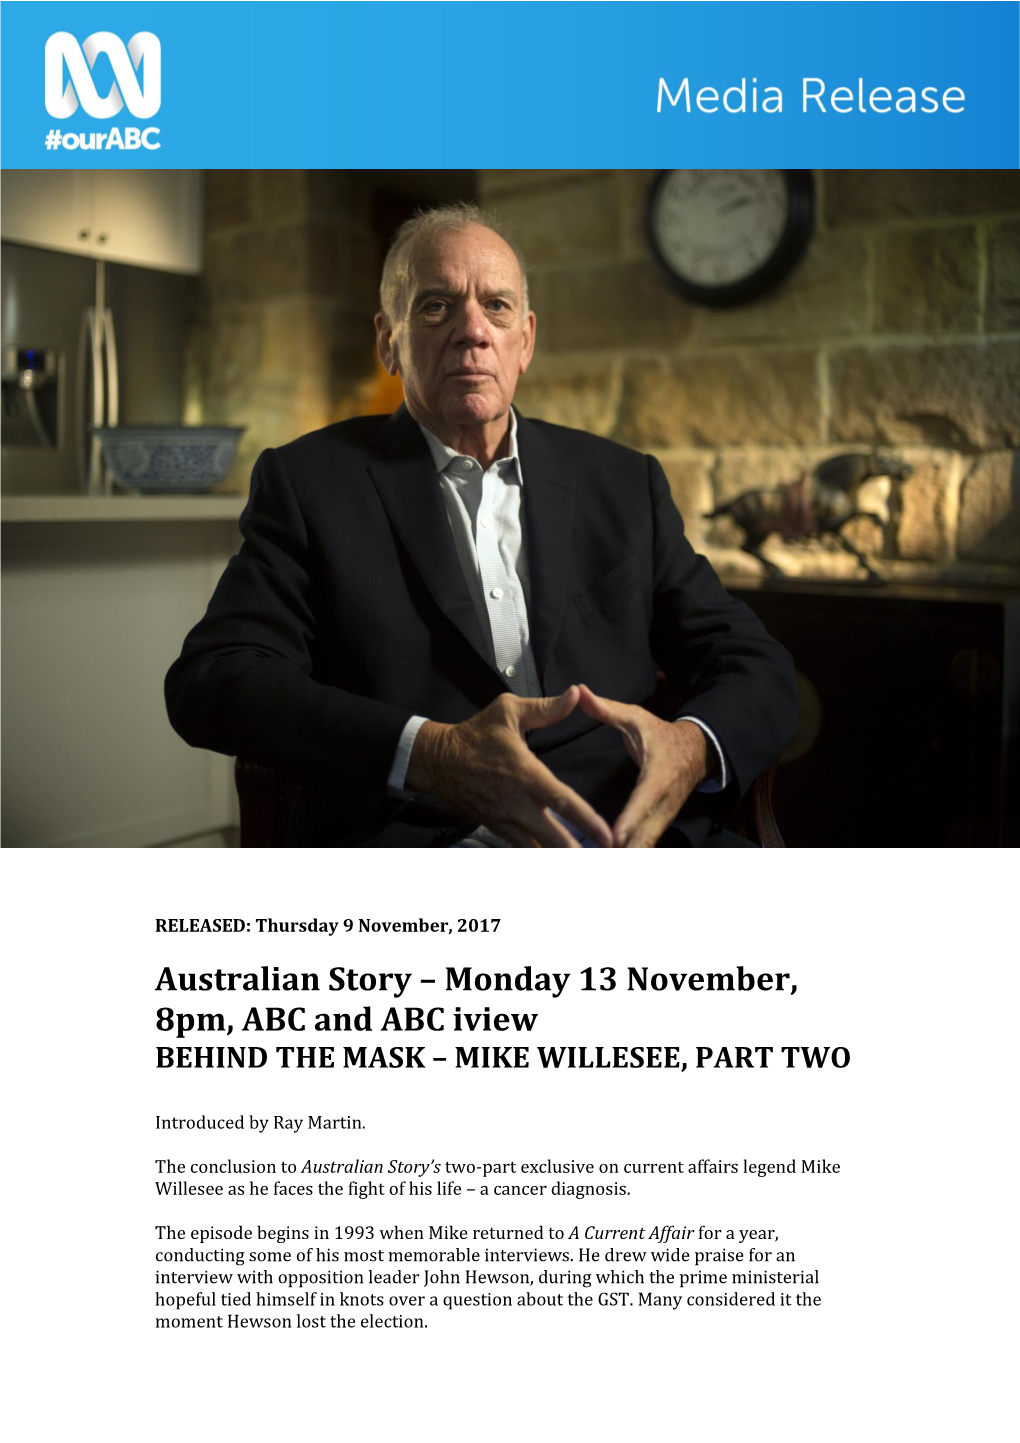 Australian Story – Monday 13 November, 8Pm, ABC and ABC Iview BEHIND the MASK – MIKE WILLESEE, PART TWO